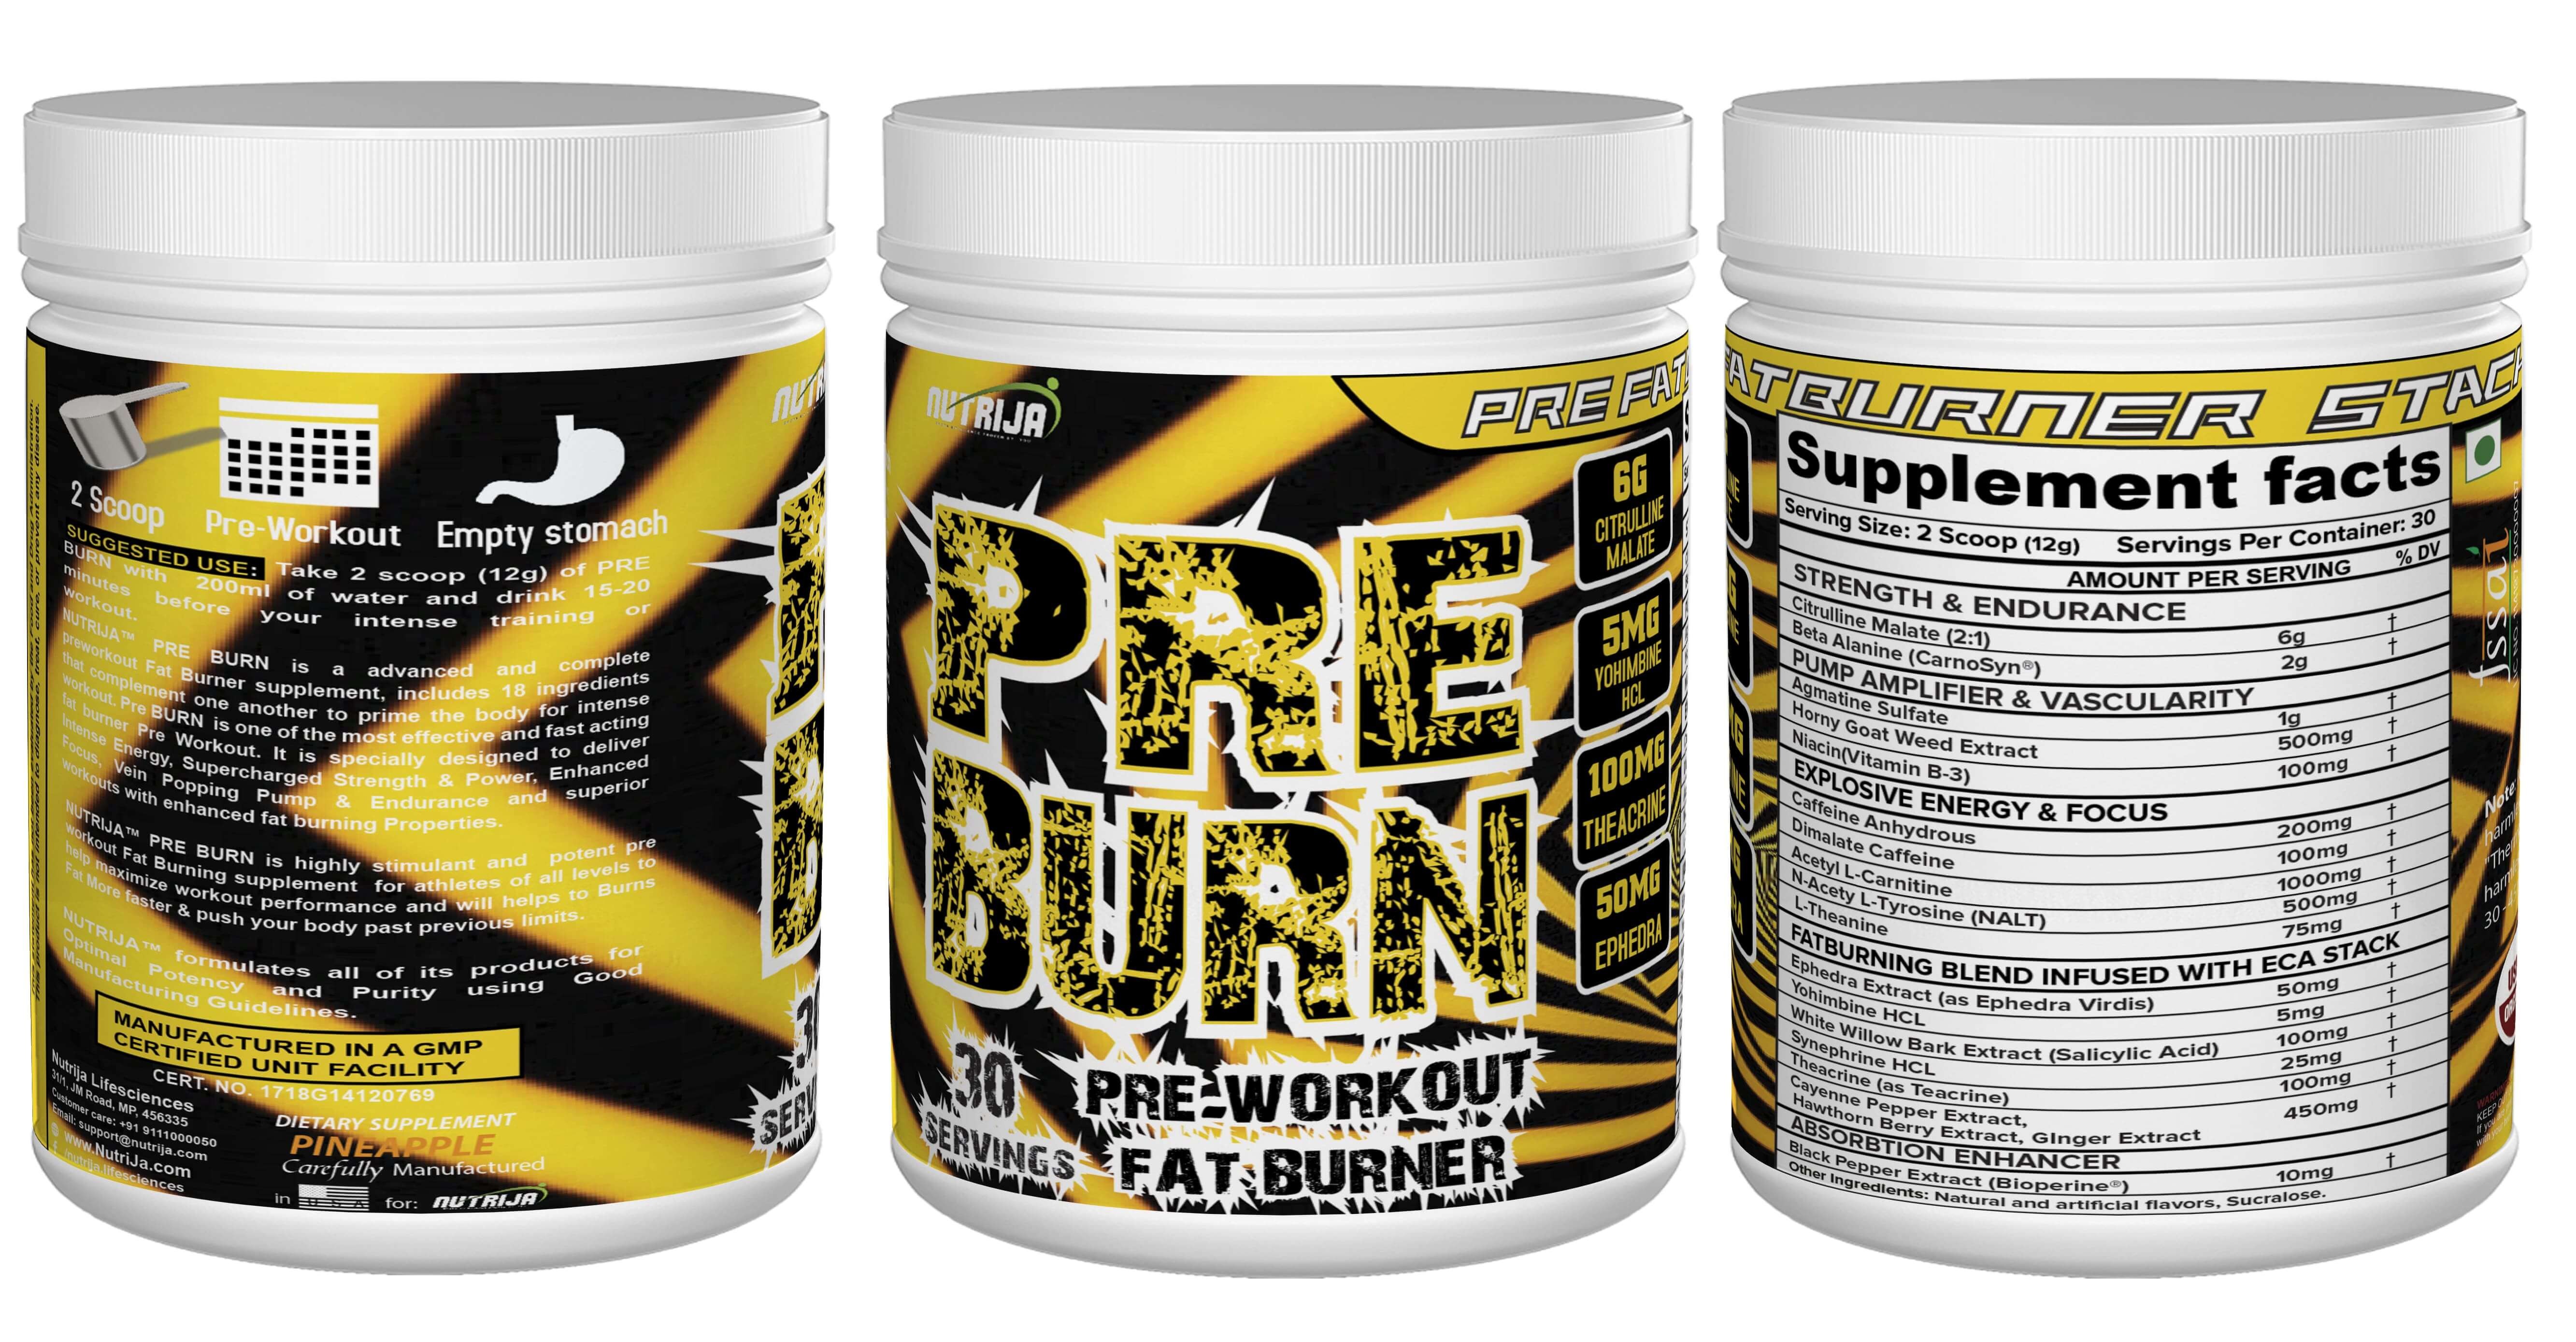  Pre workout fat burner pills for Weight Loss